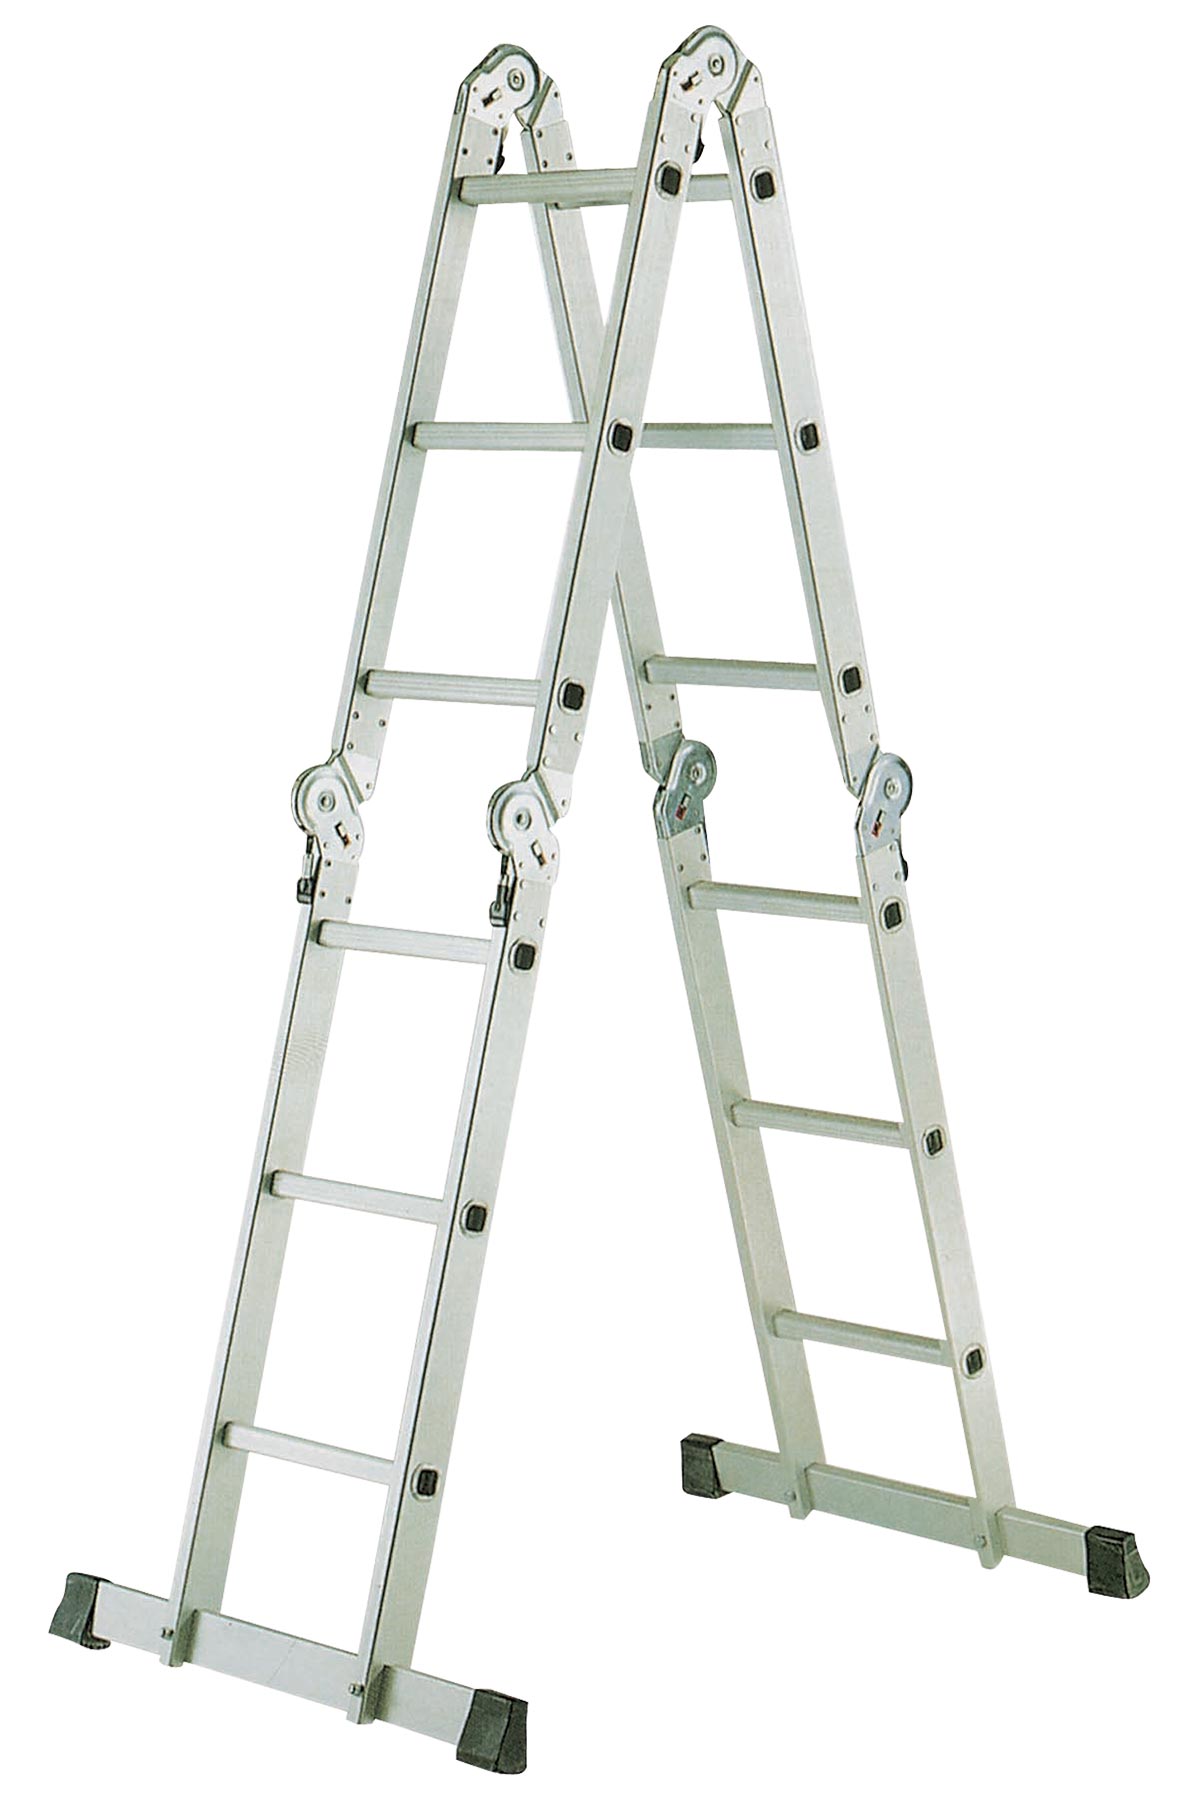 T6 Double Balance Pole Multi-Function Articulating Ladder -CHIAO TENG HSIN  ENTERPRISE CO., LTD.-Specialized ladders tool,Aluminum ladder,Folding Ladder,Stepladder,Straight  Ladder,Extension Ladder,Household Stepladder,gardening ladder,Special Ladder  and